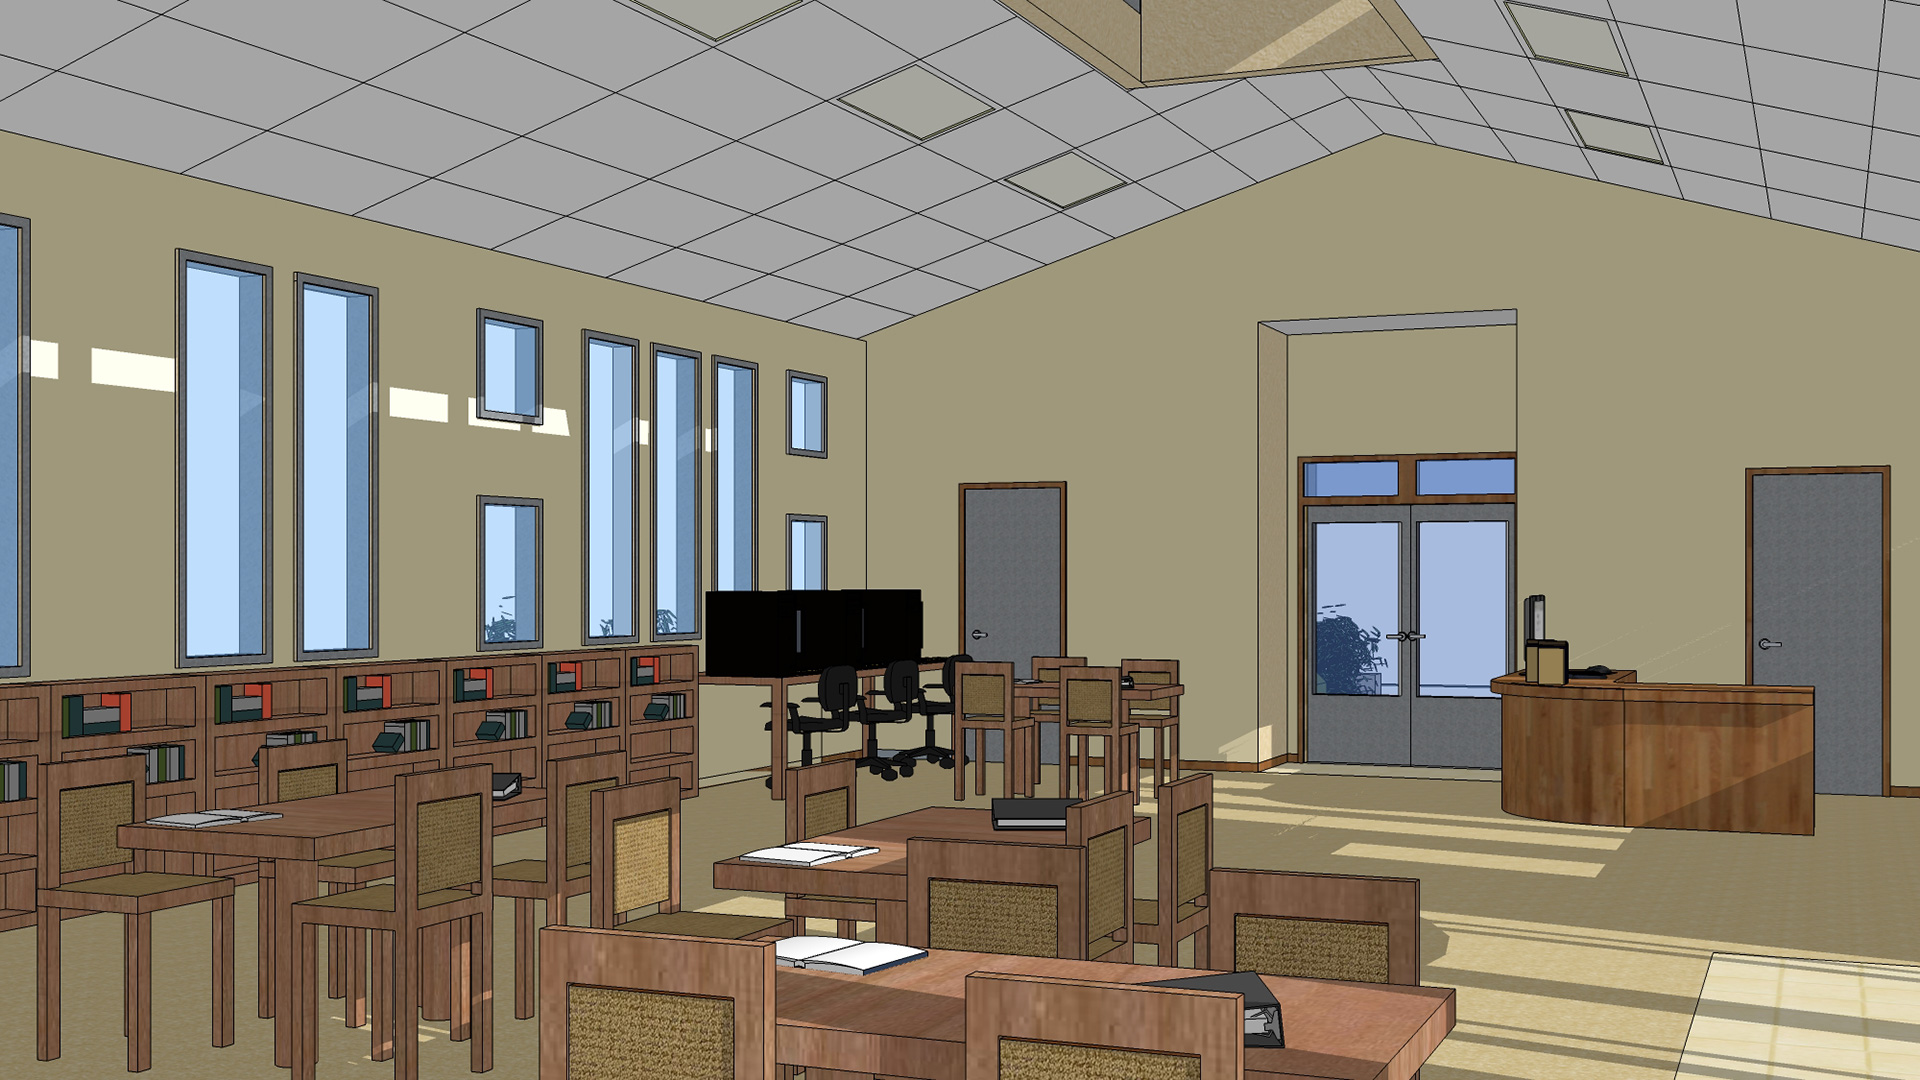 Rendering of library interior, showing wooden tables and chairs, closely representing the finished build.